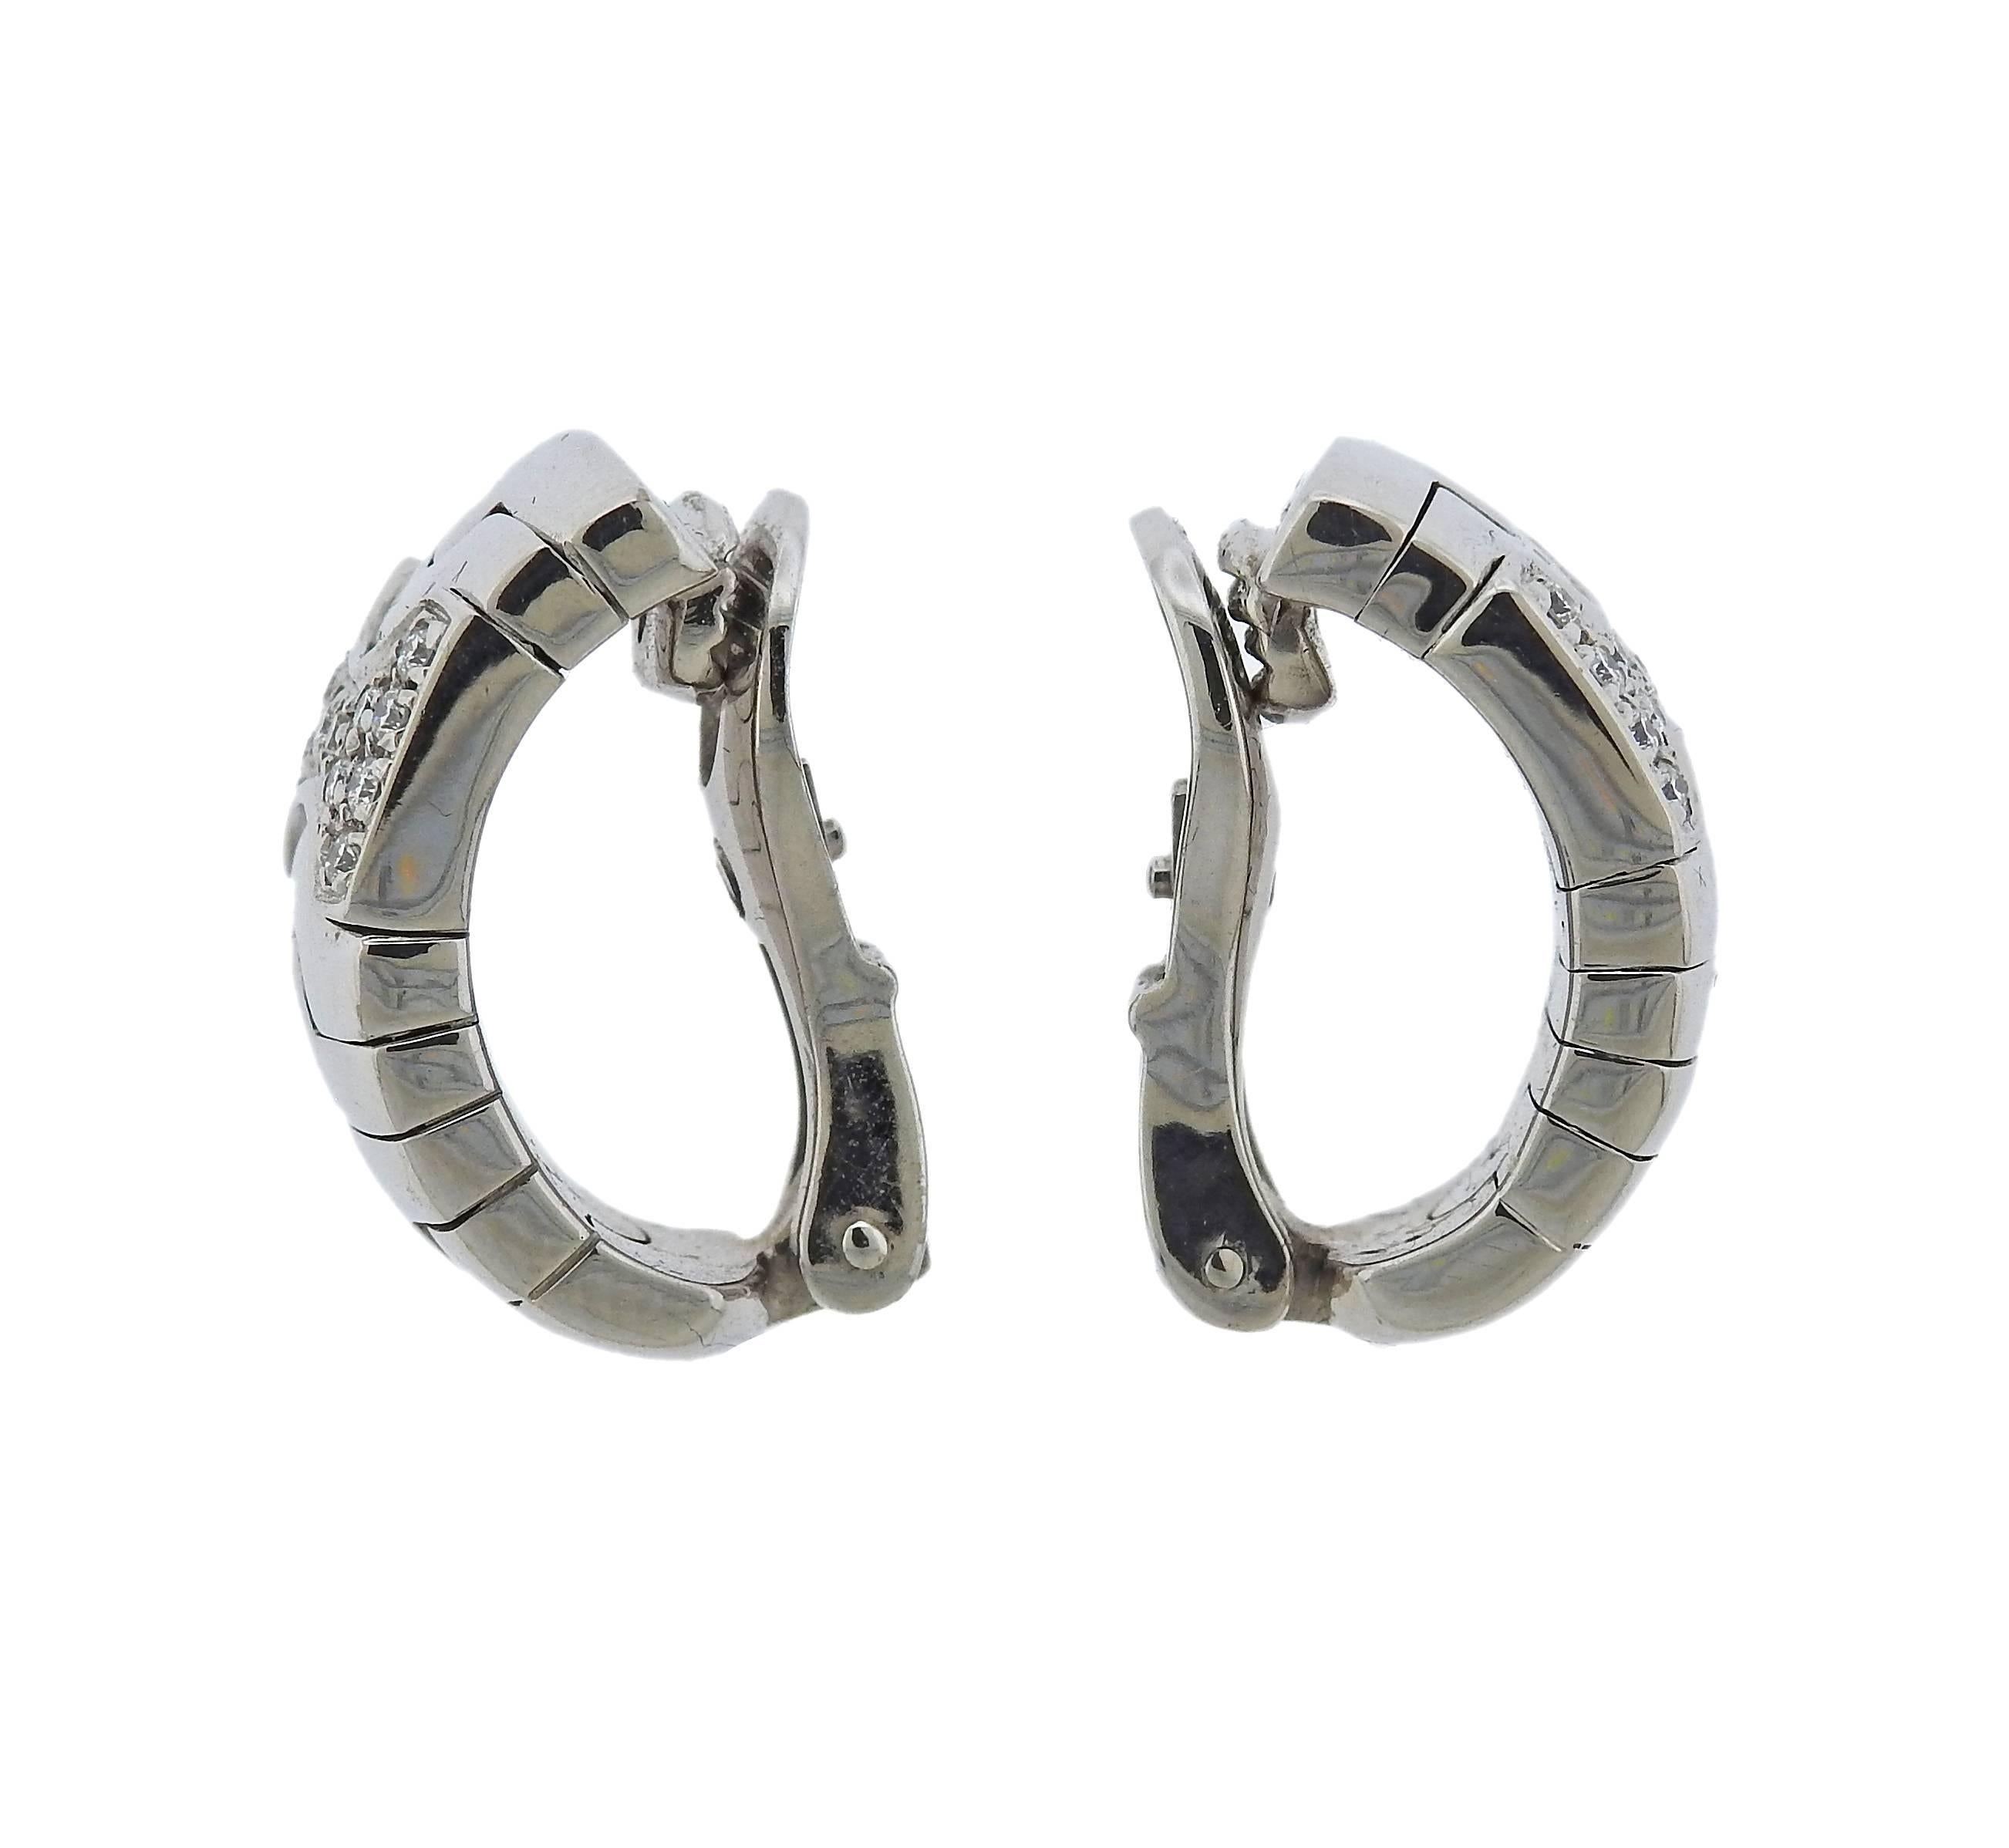 Pair of 18k white gold half hoop earrings, crafted by Bulgari for Parentesi collection, set with approx. 0.30ctw in G/VS diamonds. Earrings are 19mm x 11mm , marked: Bvlgari, 750, made in Italy. Weight - 21.1 grams 